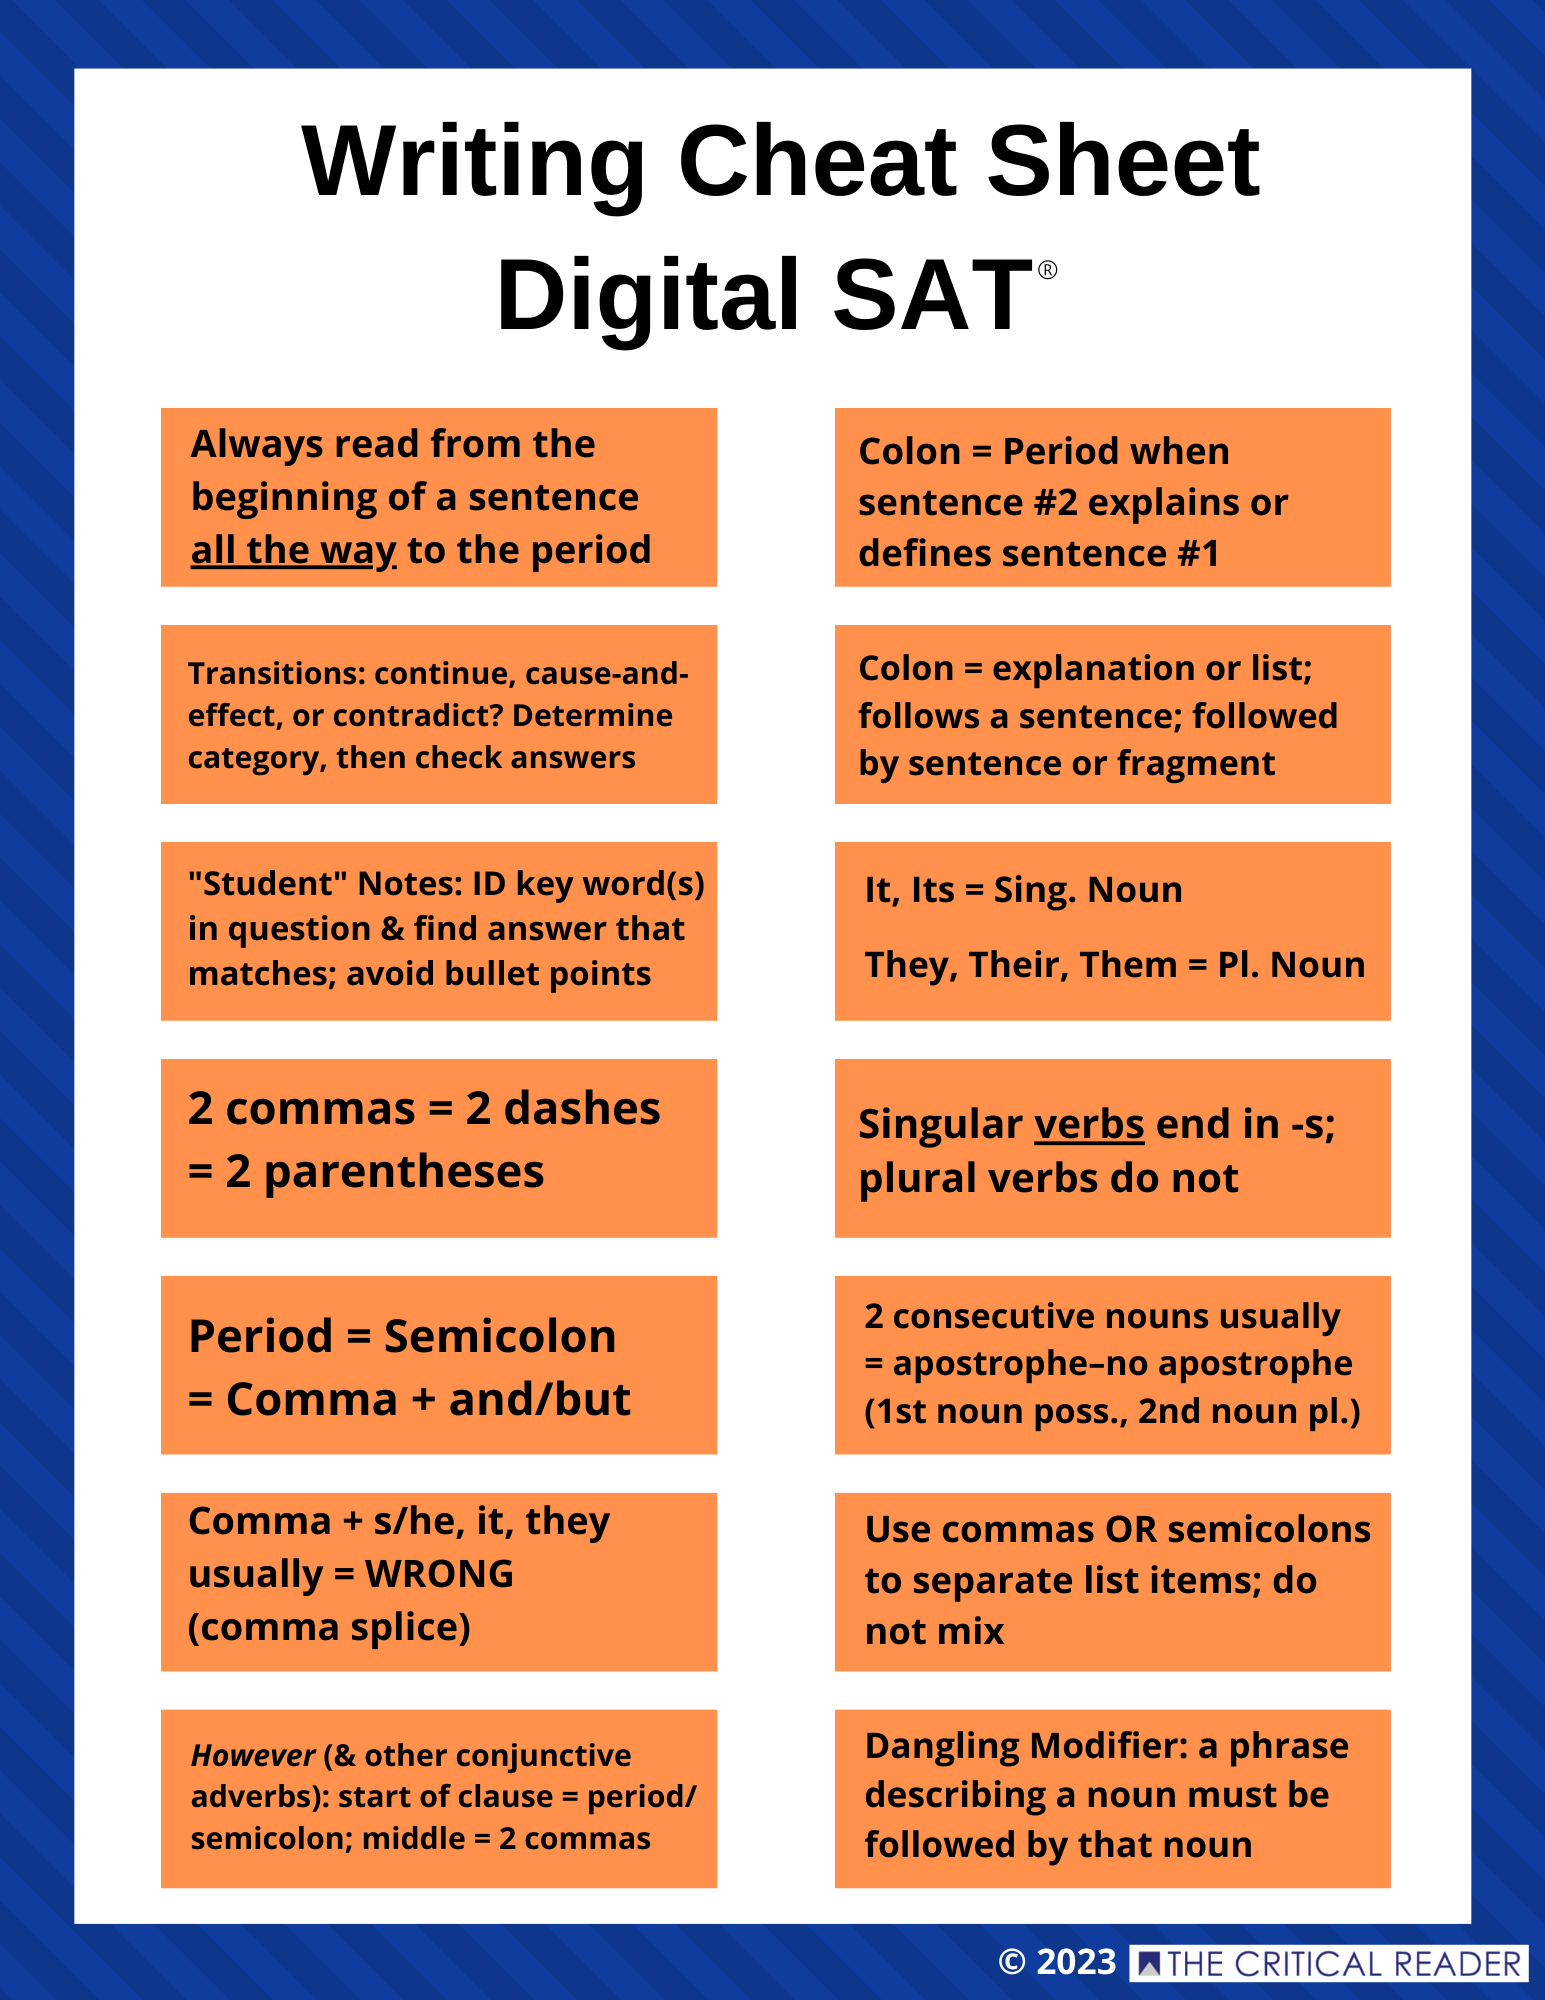 is there an essay section on the digital sat